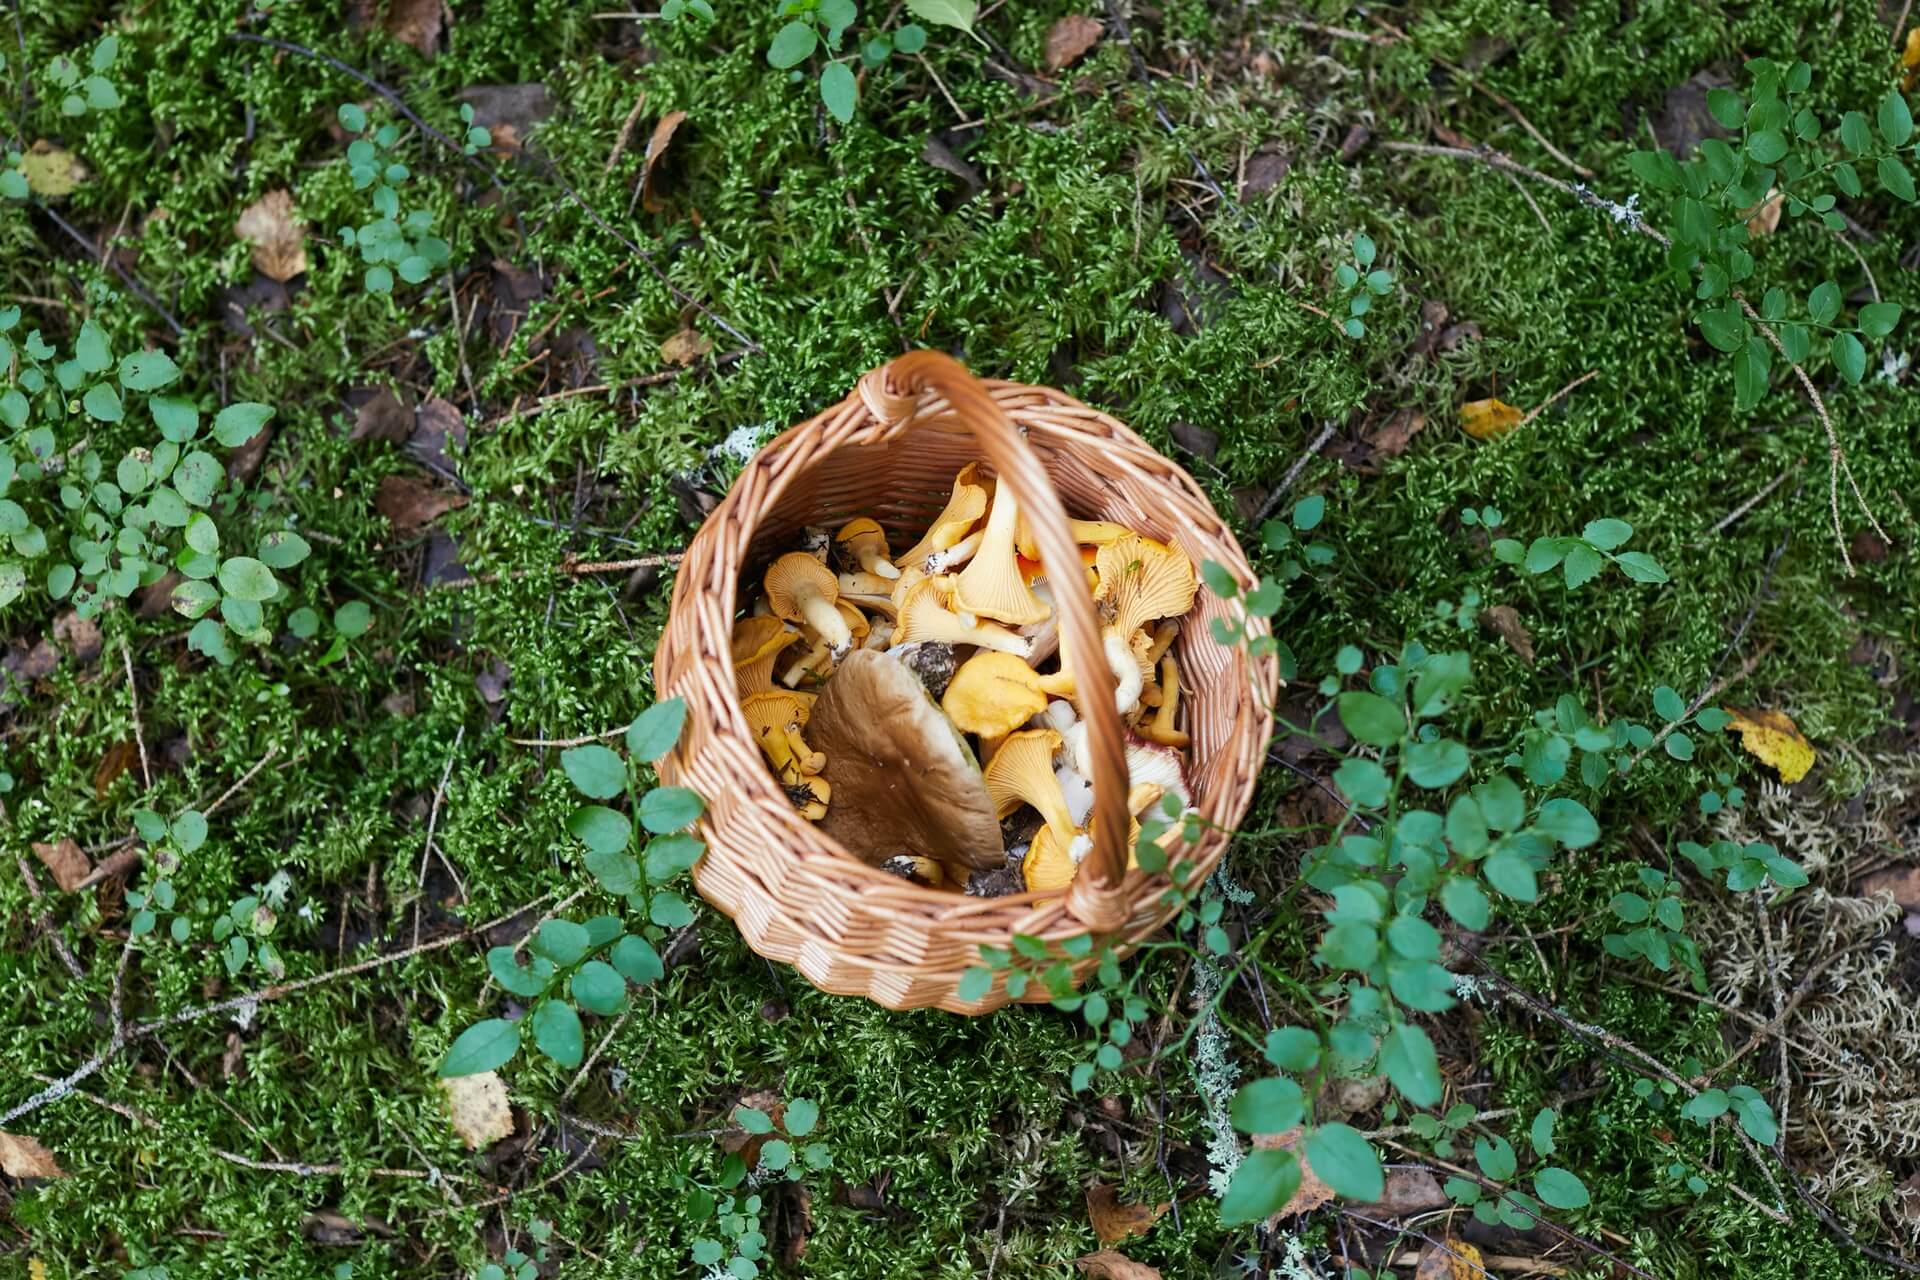 A basket of picked mushrooms